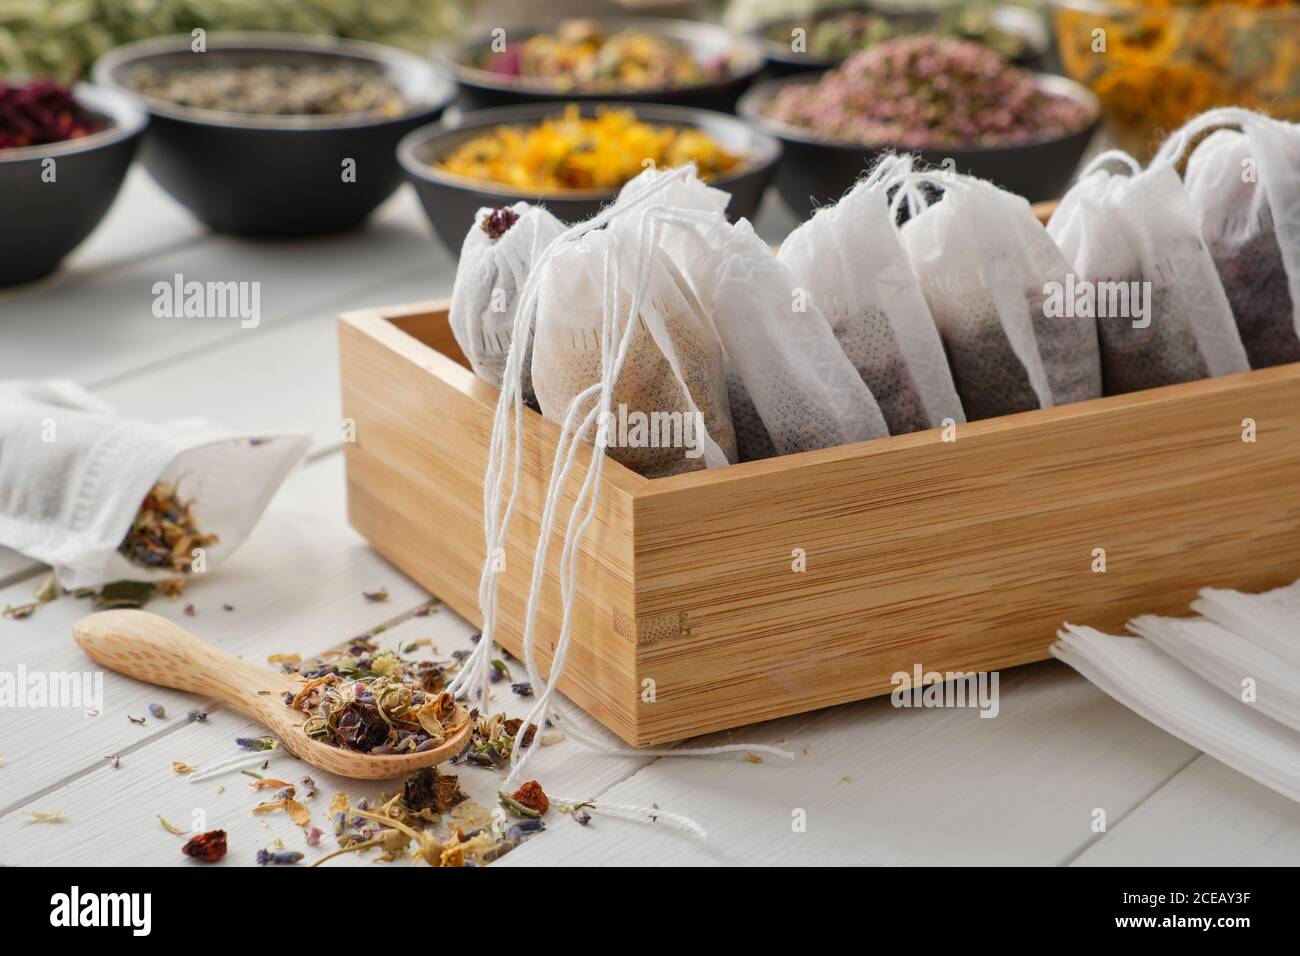 Wooden box of tea bags filled with dry medicinal herbs and flowers. Bowls of medicinal plants on background. Alternative medicine Stock Photo